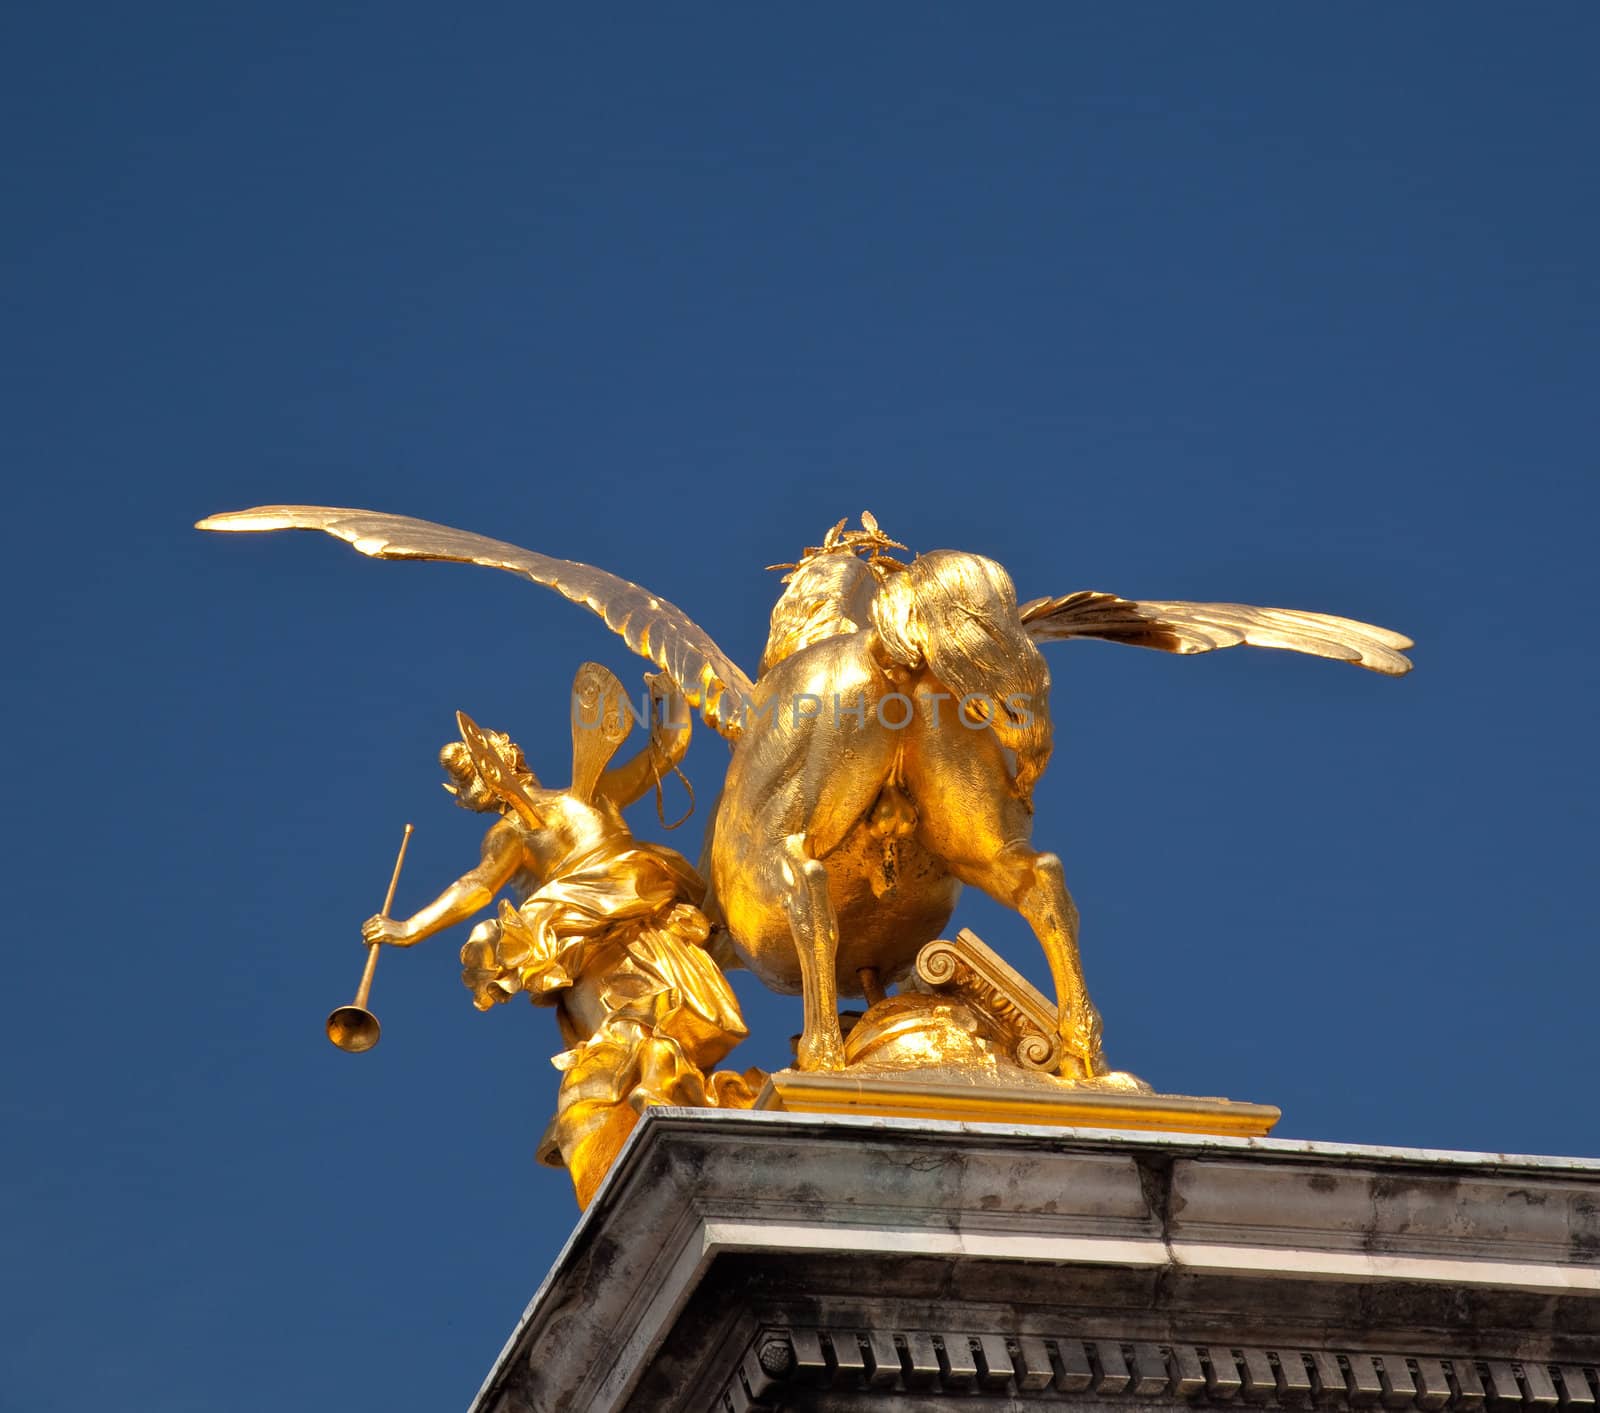 Rear view of a golden horse on Pont Alexandre in Paris - could be used for humorous reference